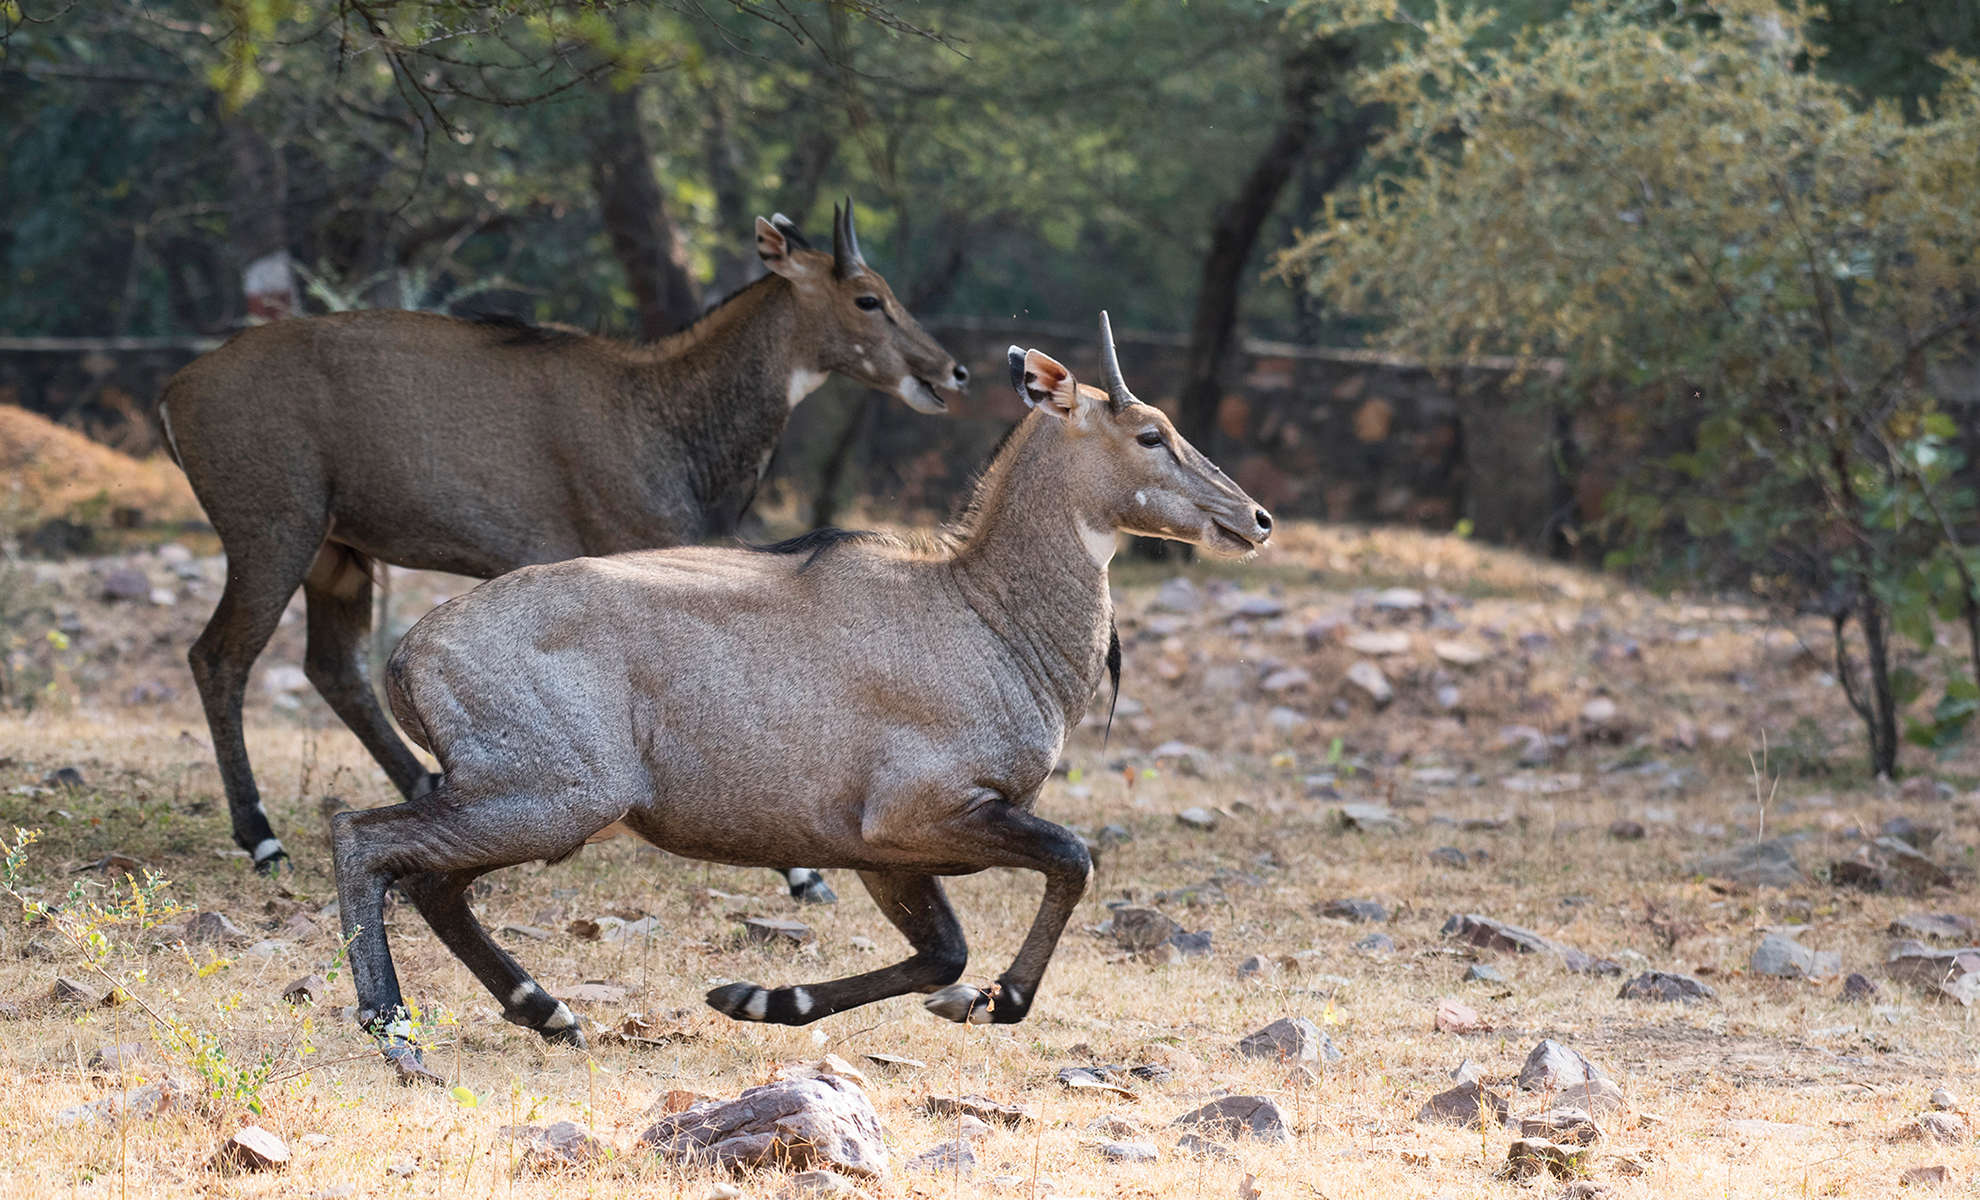 The King Ranch pioneered the release of nilgai in Texas, according to the Texas State Historical Association.